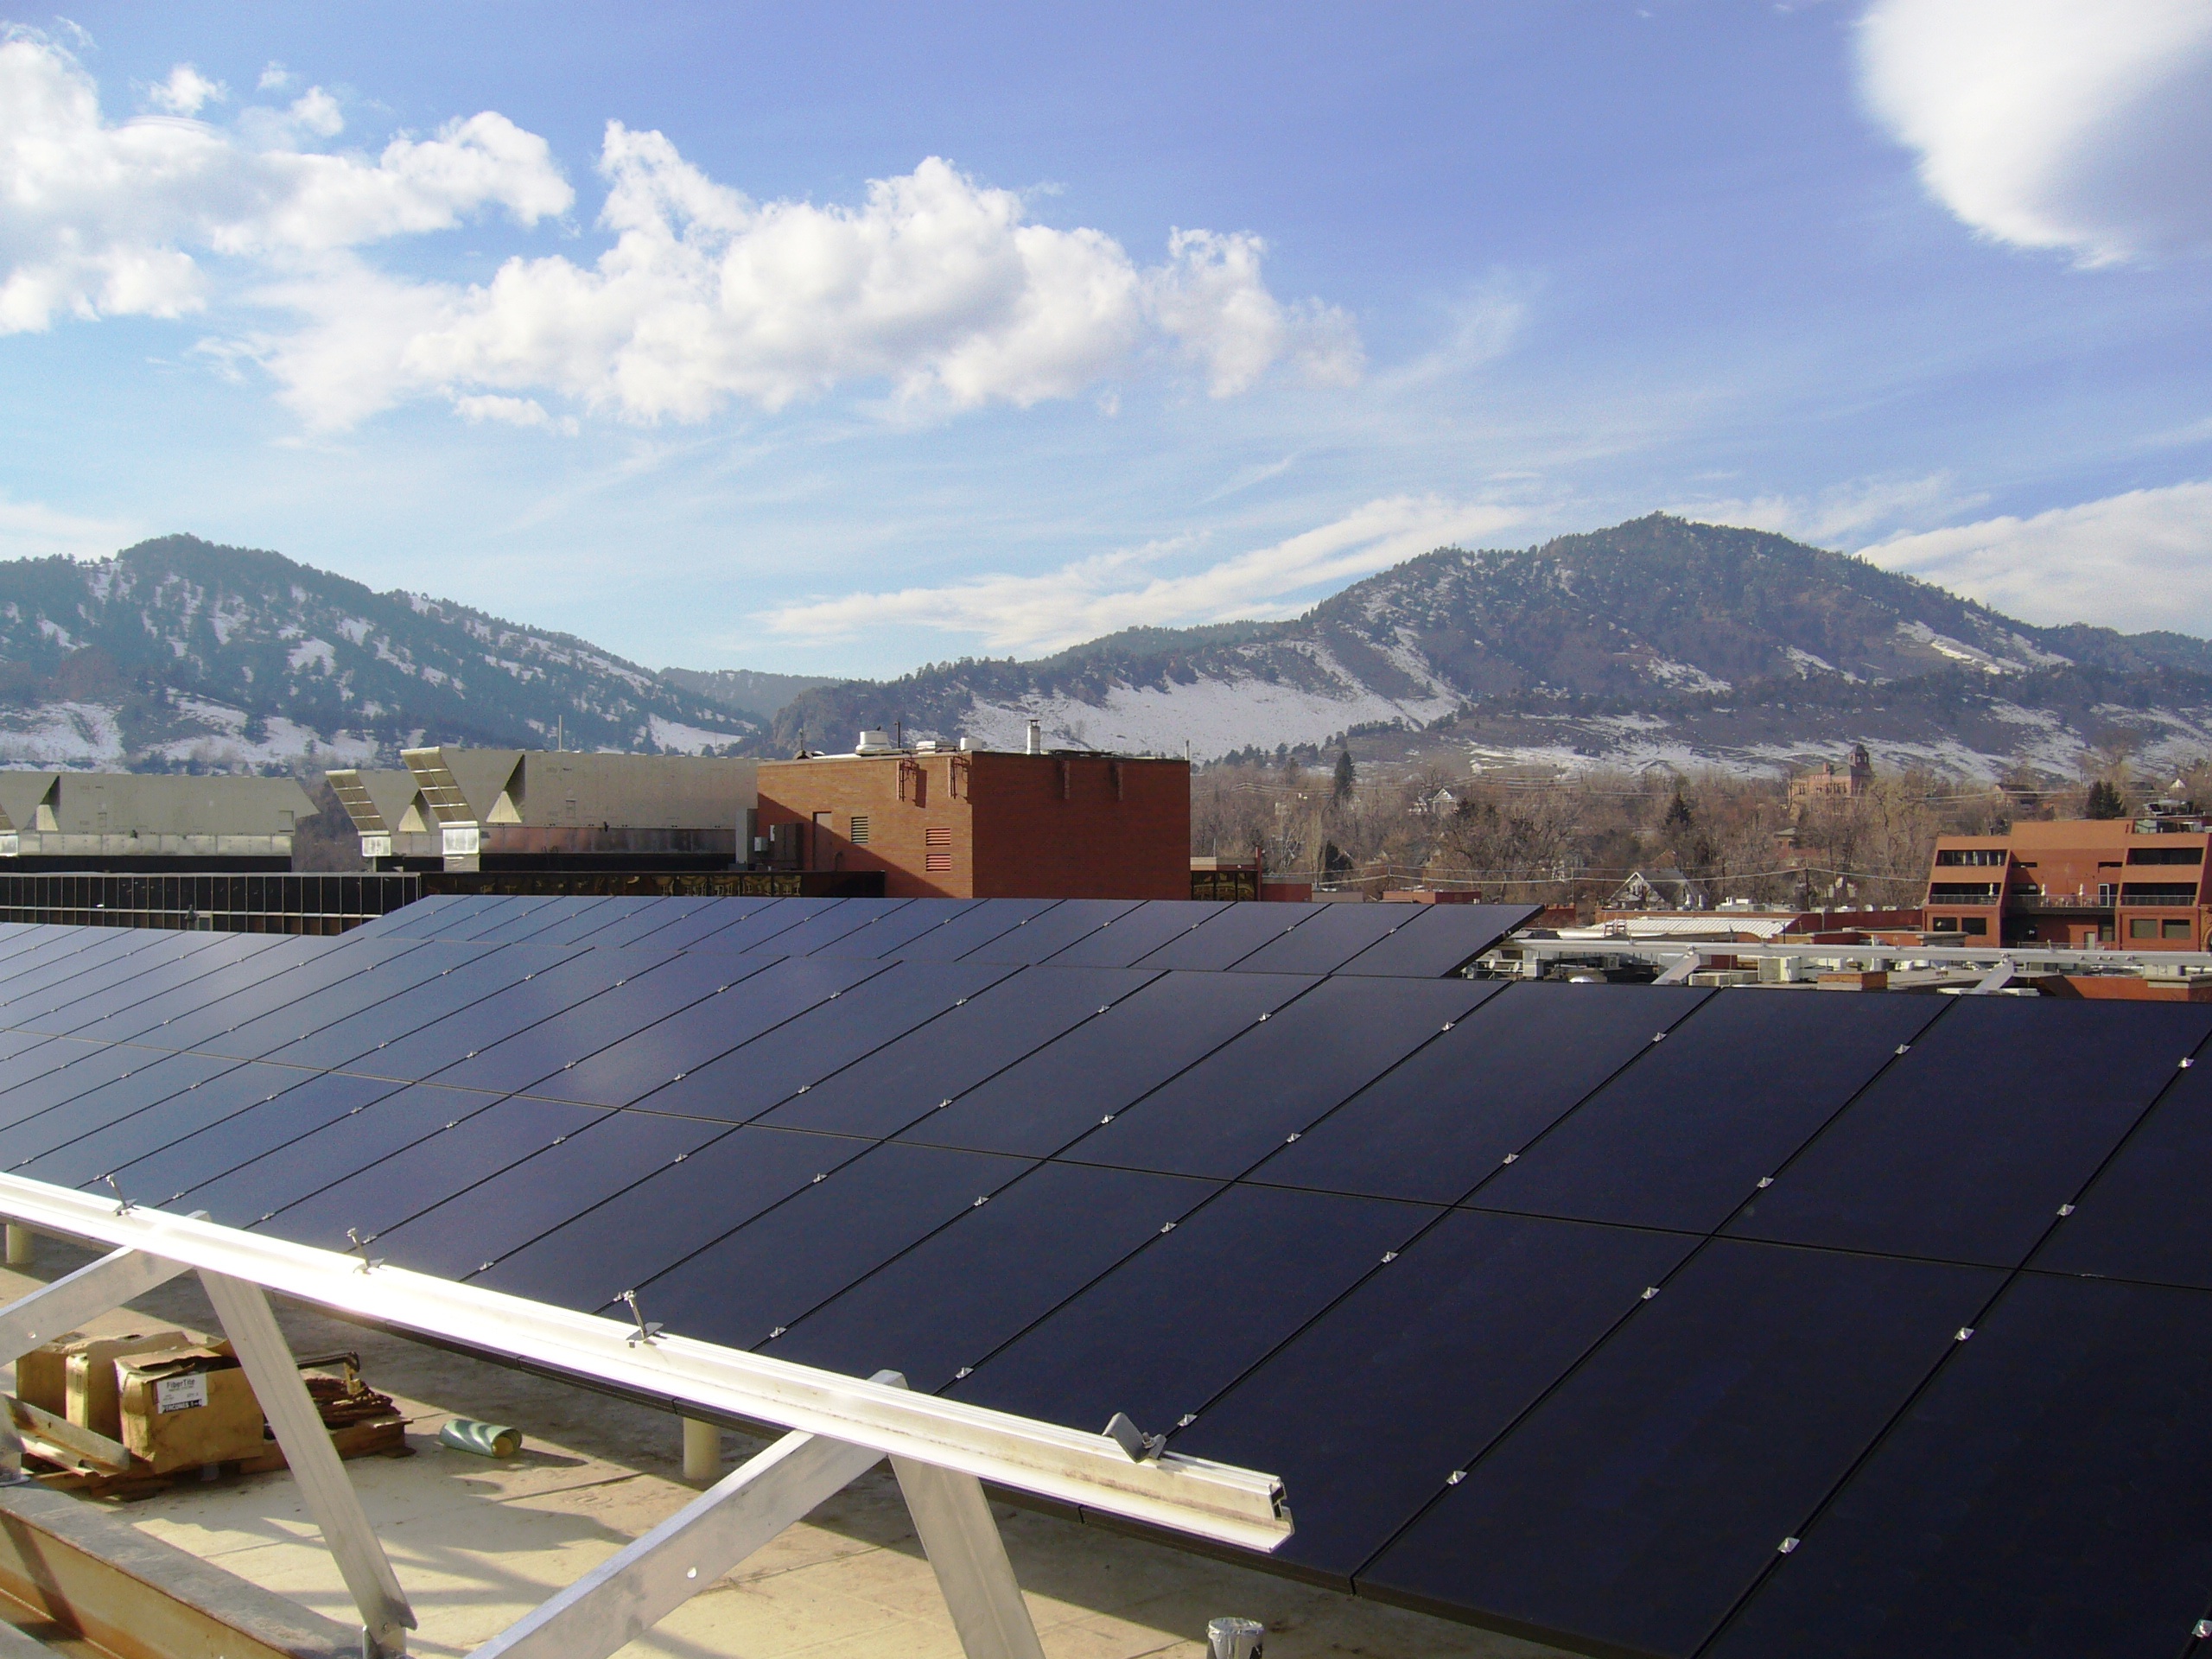 Photos of Solar Installation on Broadway St. in Boulder